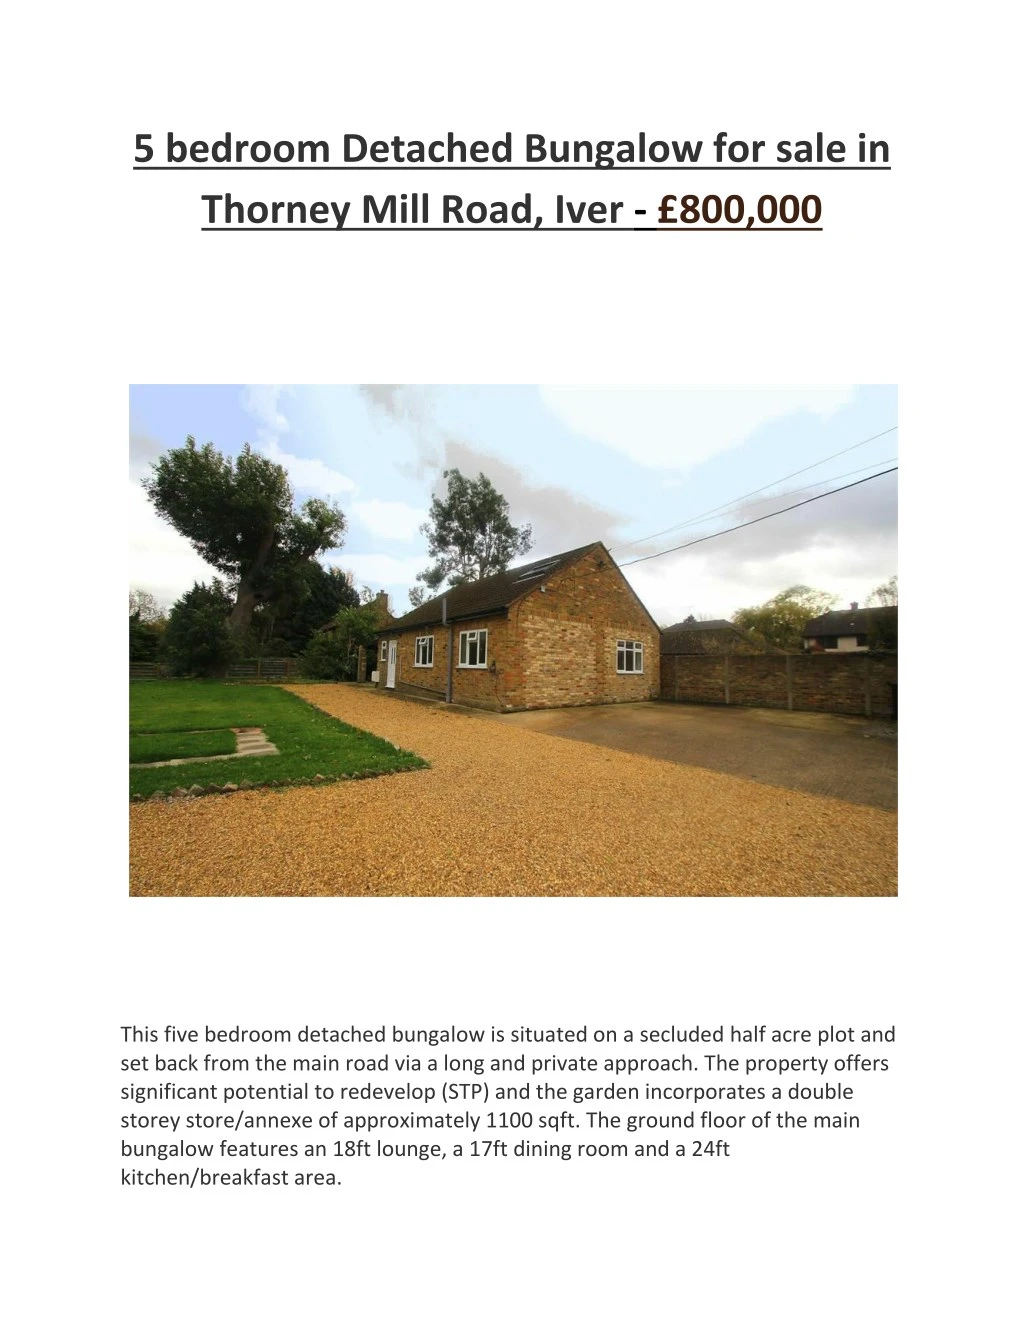 5 bedroom detached bungalow for sale in thorney